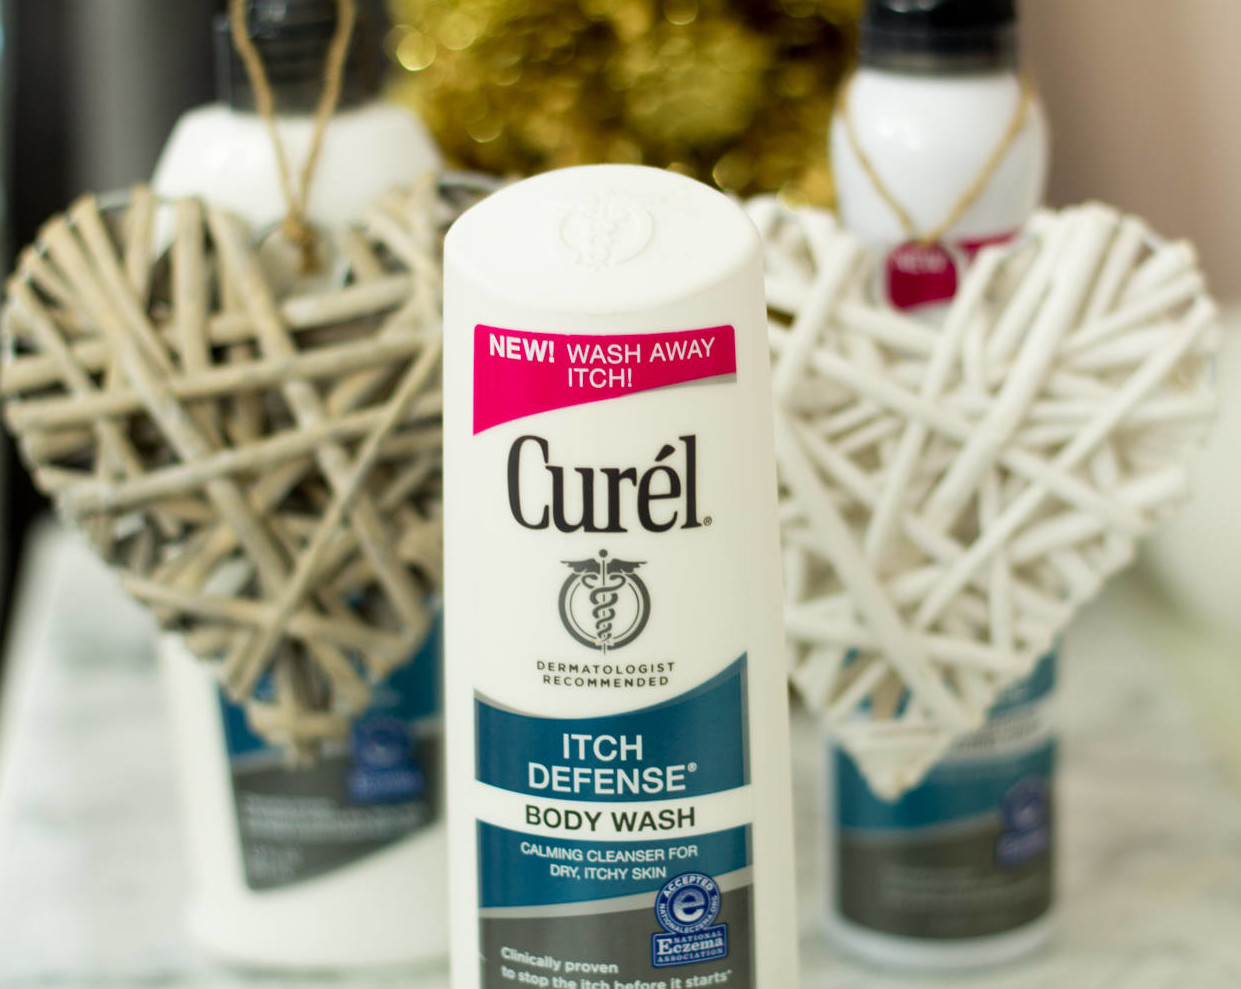 Stress less this Holiday season with Curel Itch Defense Products.